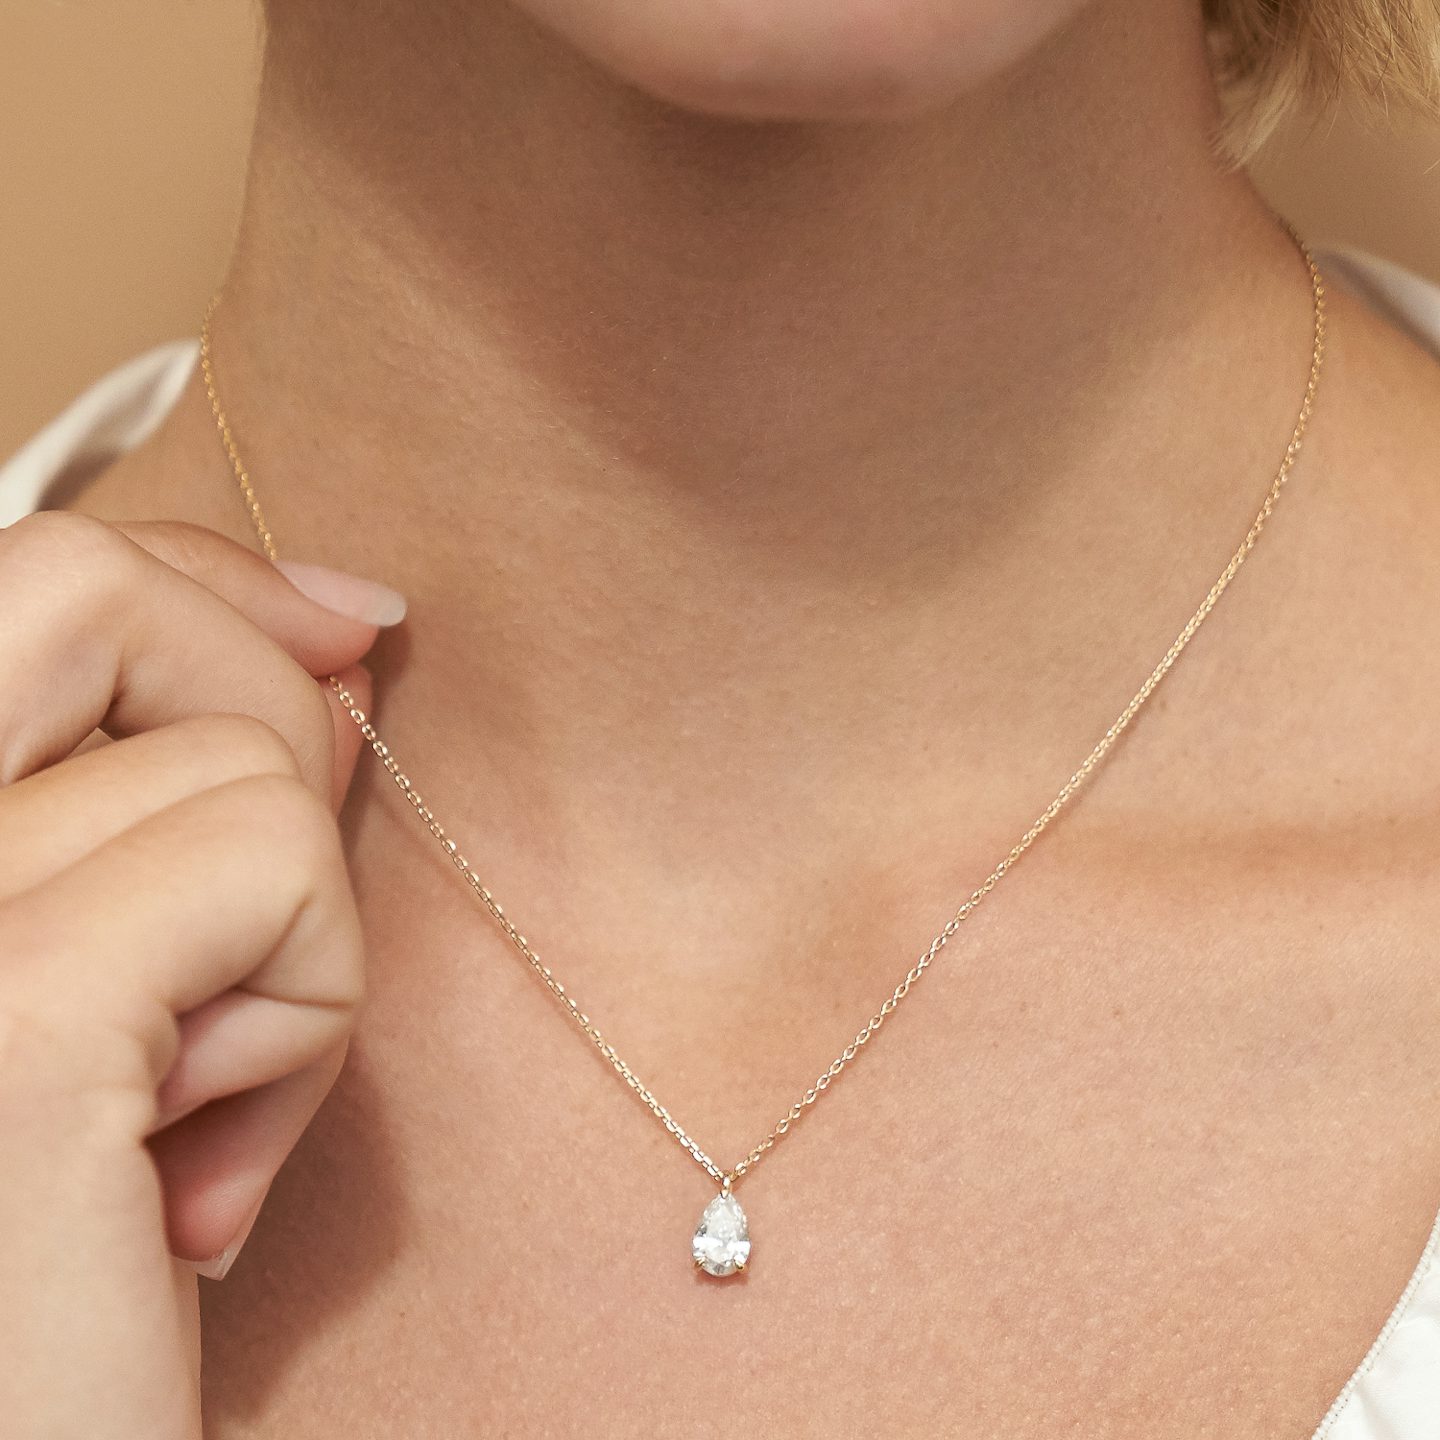 VRAI Solitaire Pendant | Pear | 14k | 18k White Gold | Carat weight: 1